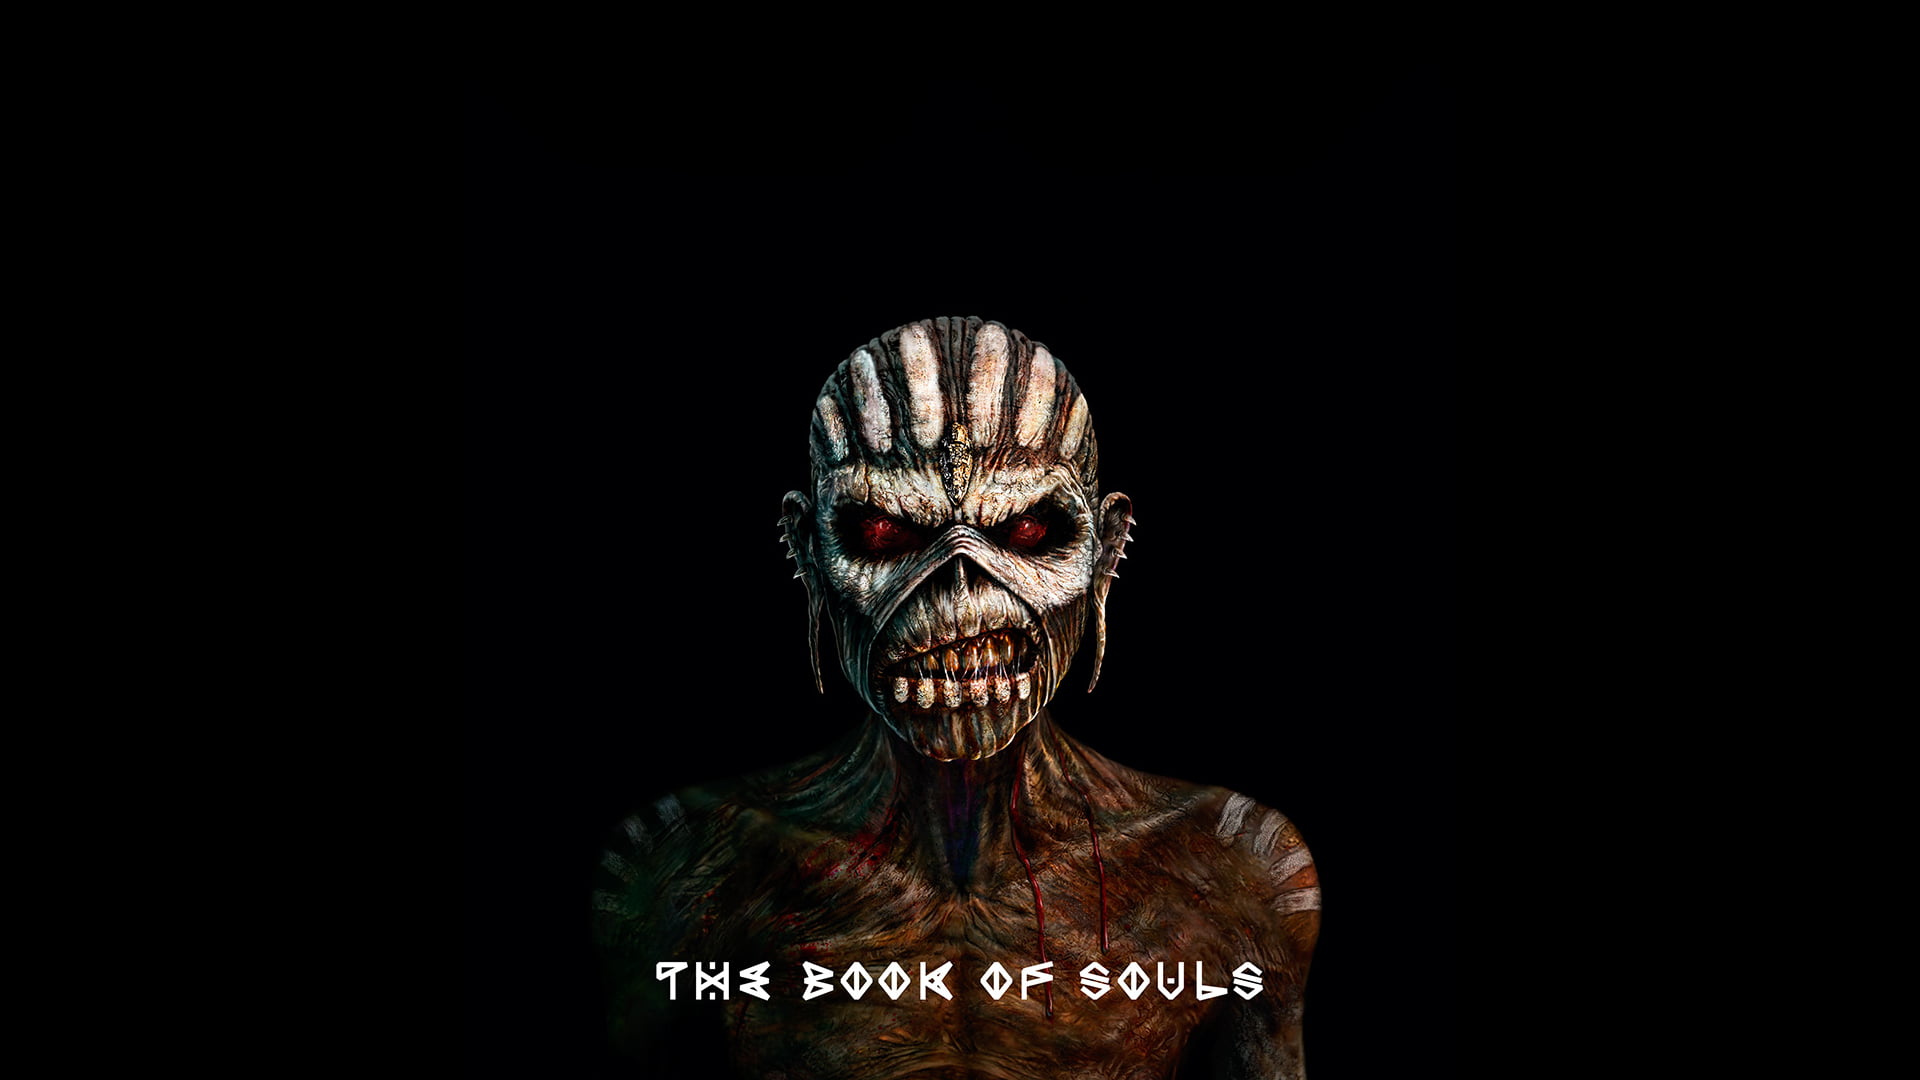 The Book of Souls digital wallpaper, Iron Maiden, album covers